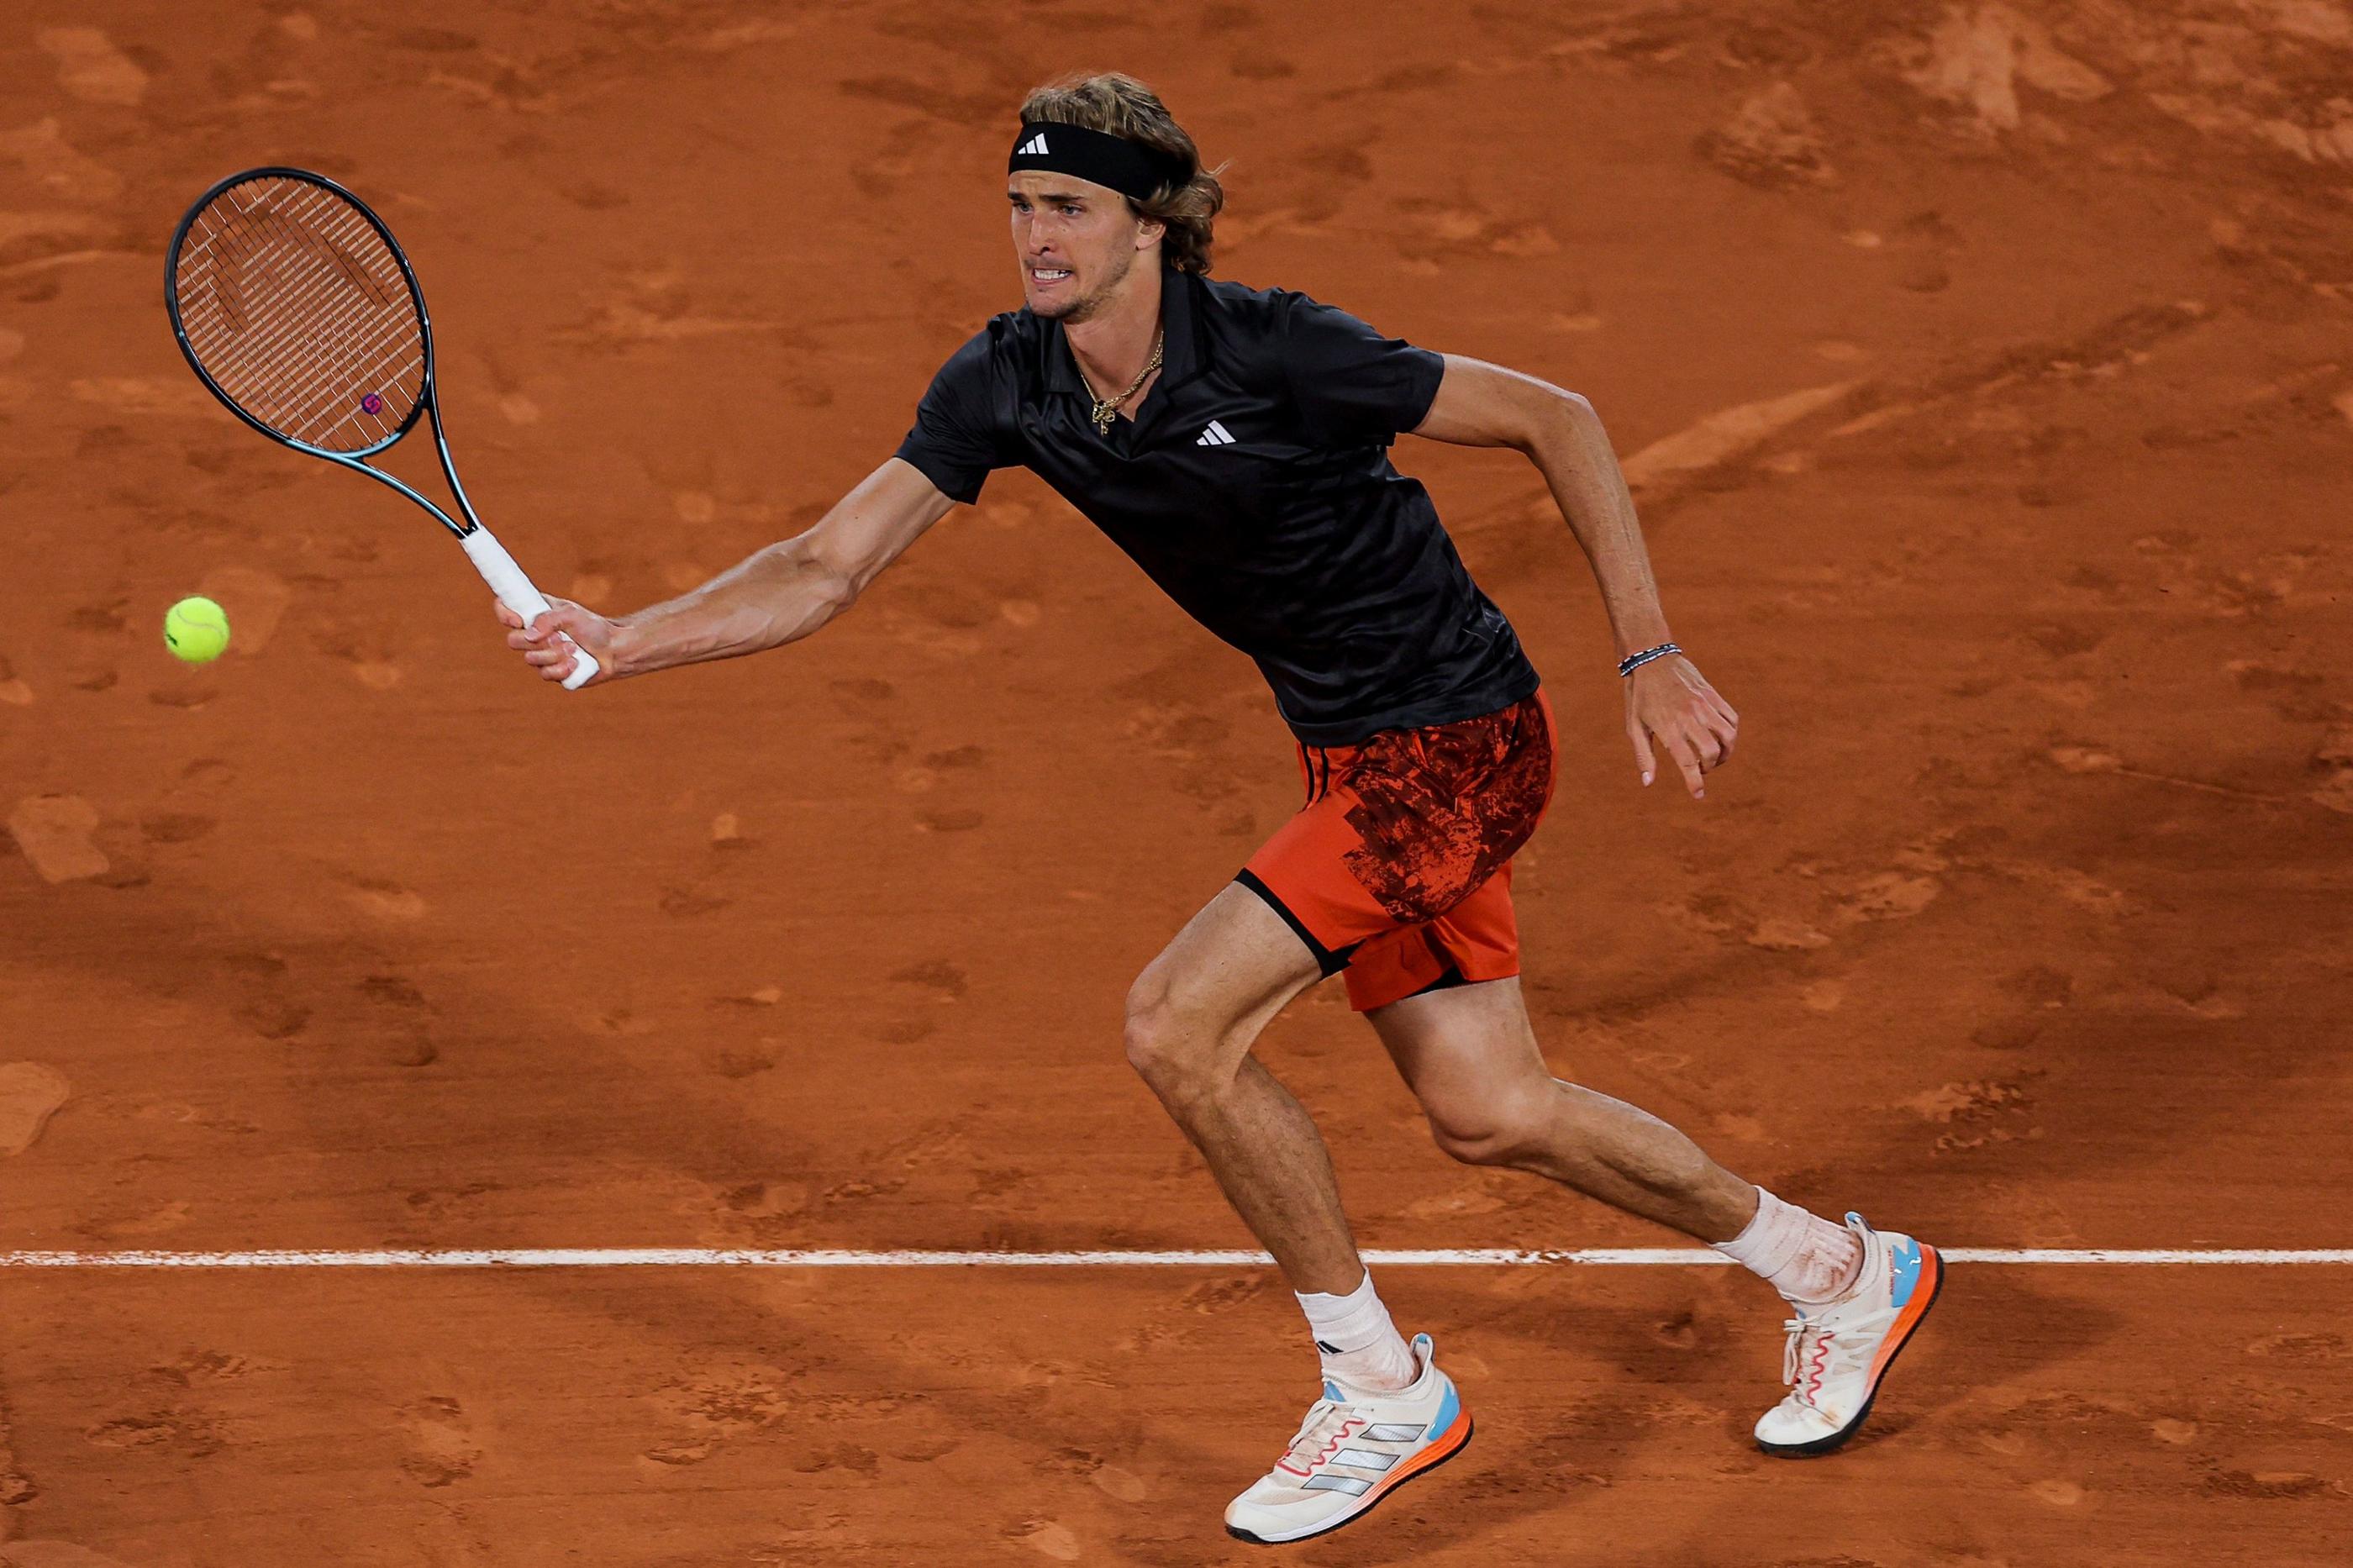 Germany's Alexander Zverev plays a forehand return to US Frances Tiafoe during their men's singles match on day seven of the Roland-Garros Open tennis tournament at the Court Philippe-Chatrier in Paris on June 3, 2023. (Photo by Thomas SAMSON / AFP)